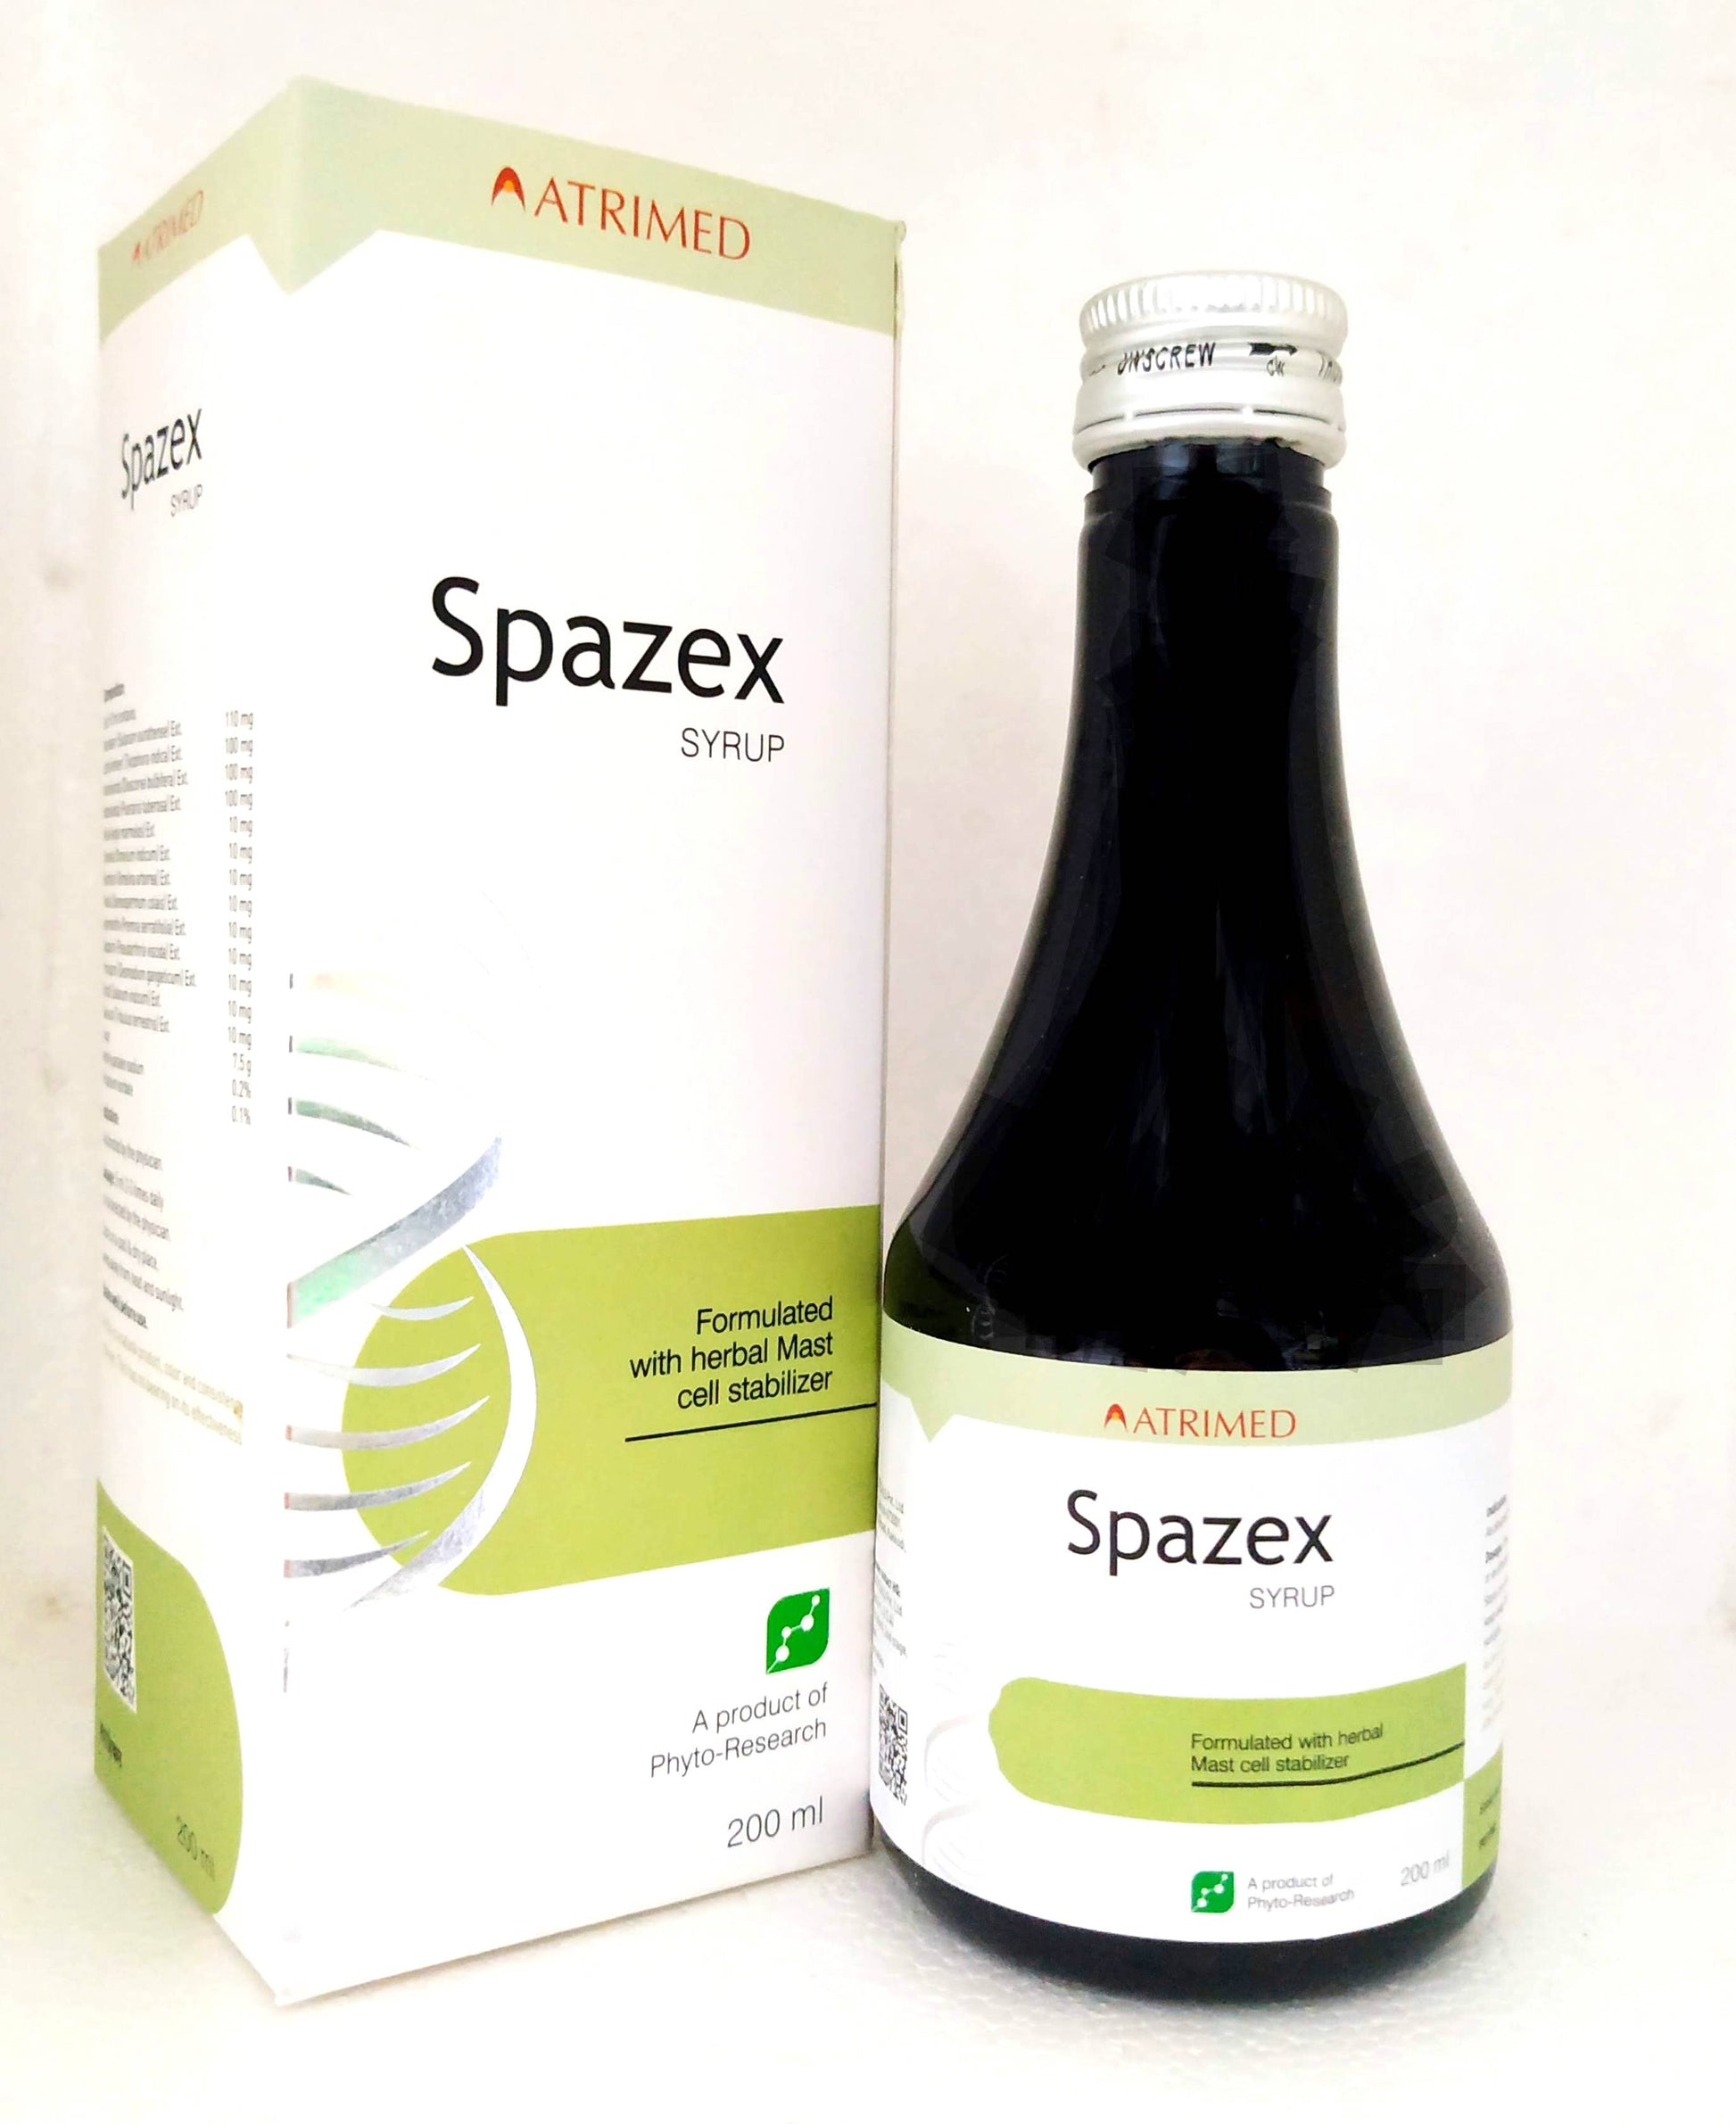 Shop Spazex Syrup 200ml at price 130.00 from Atrimed Online - Ayush Care